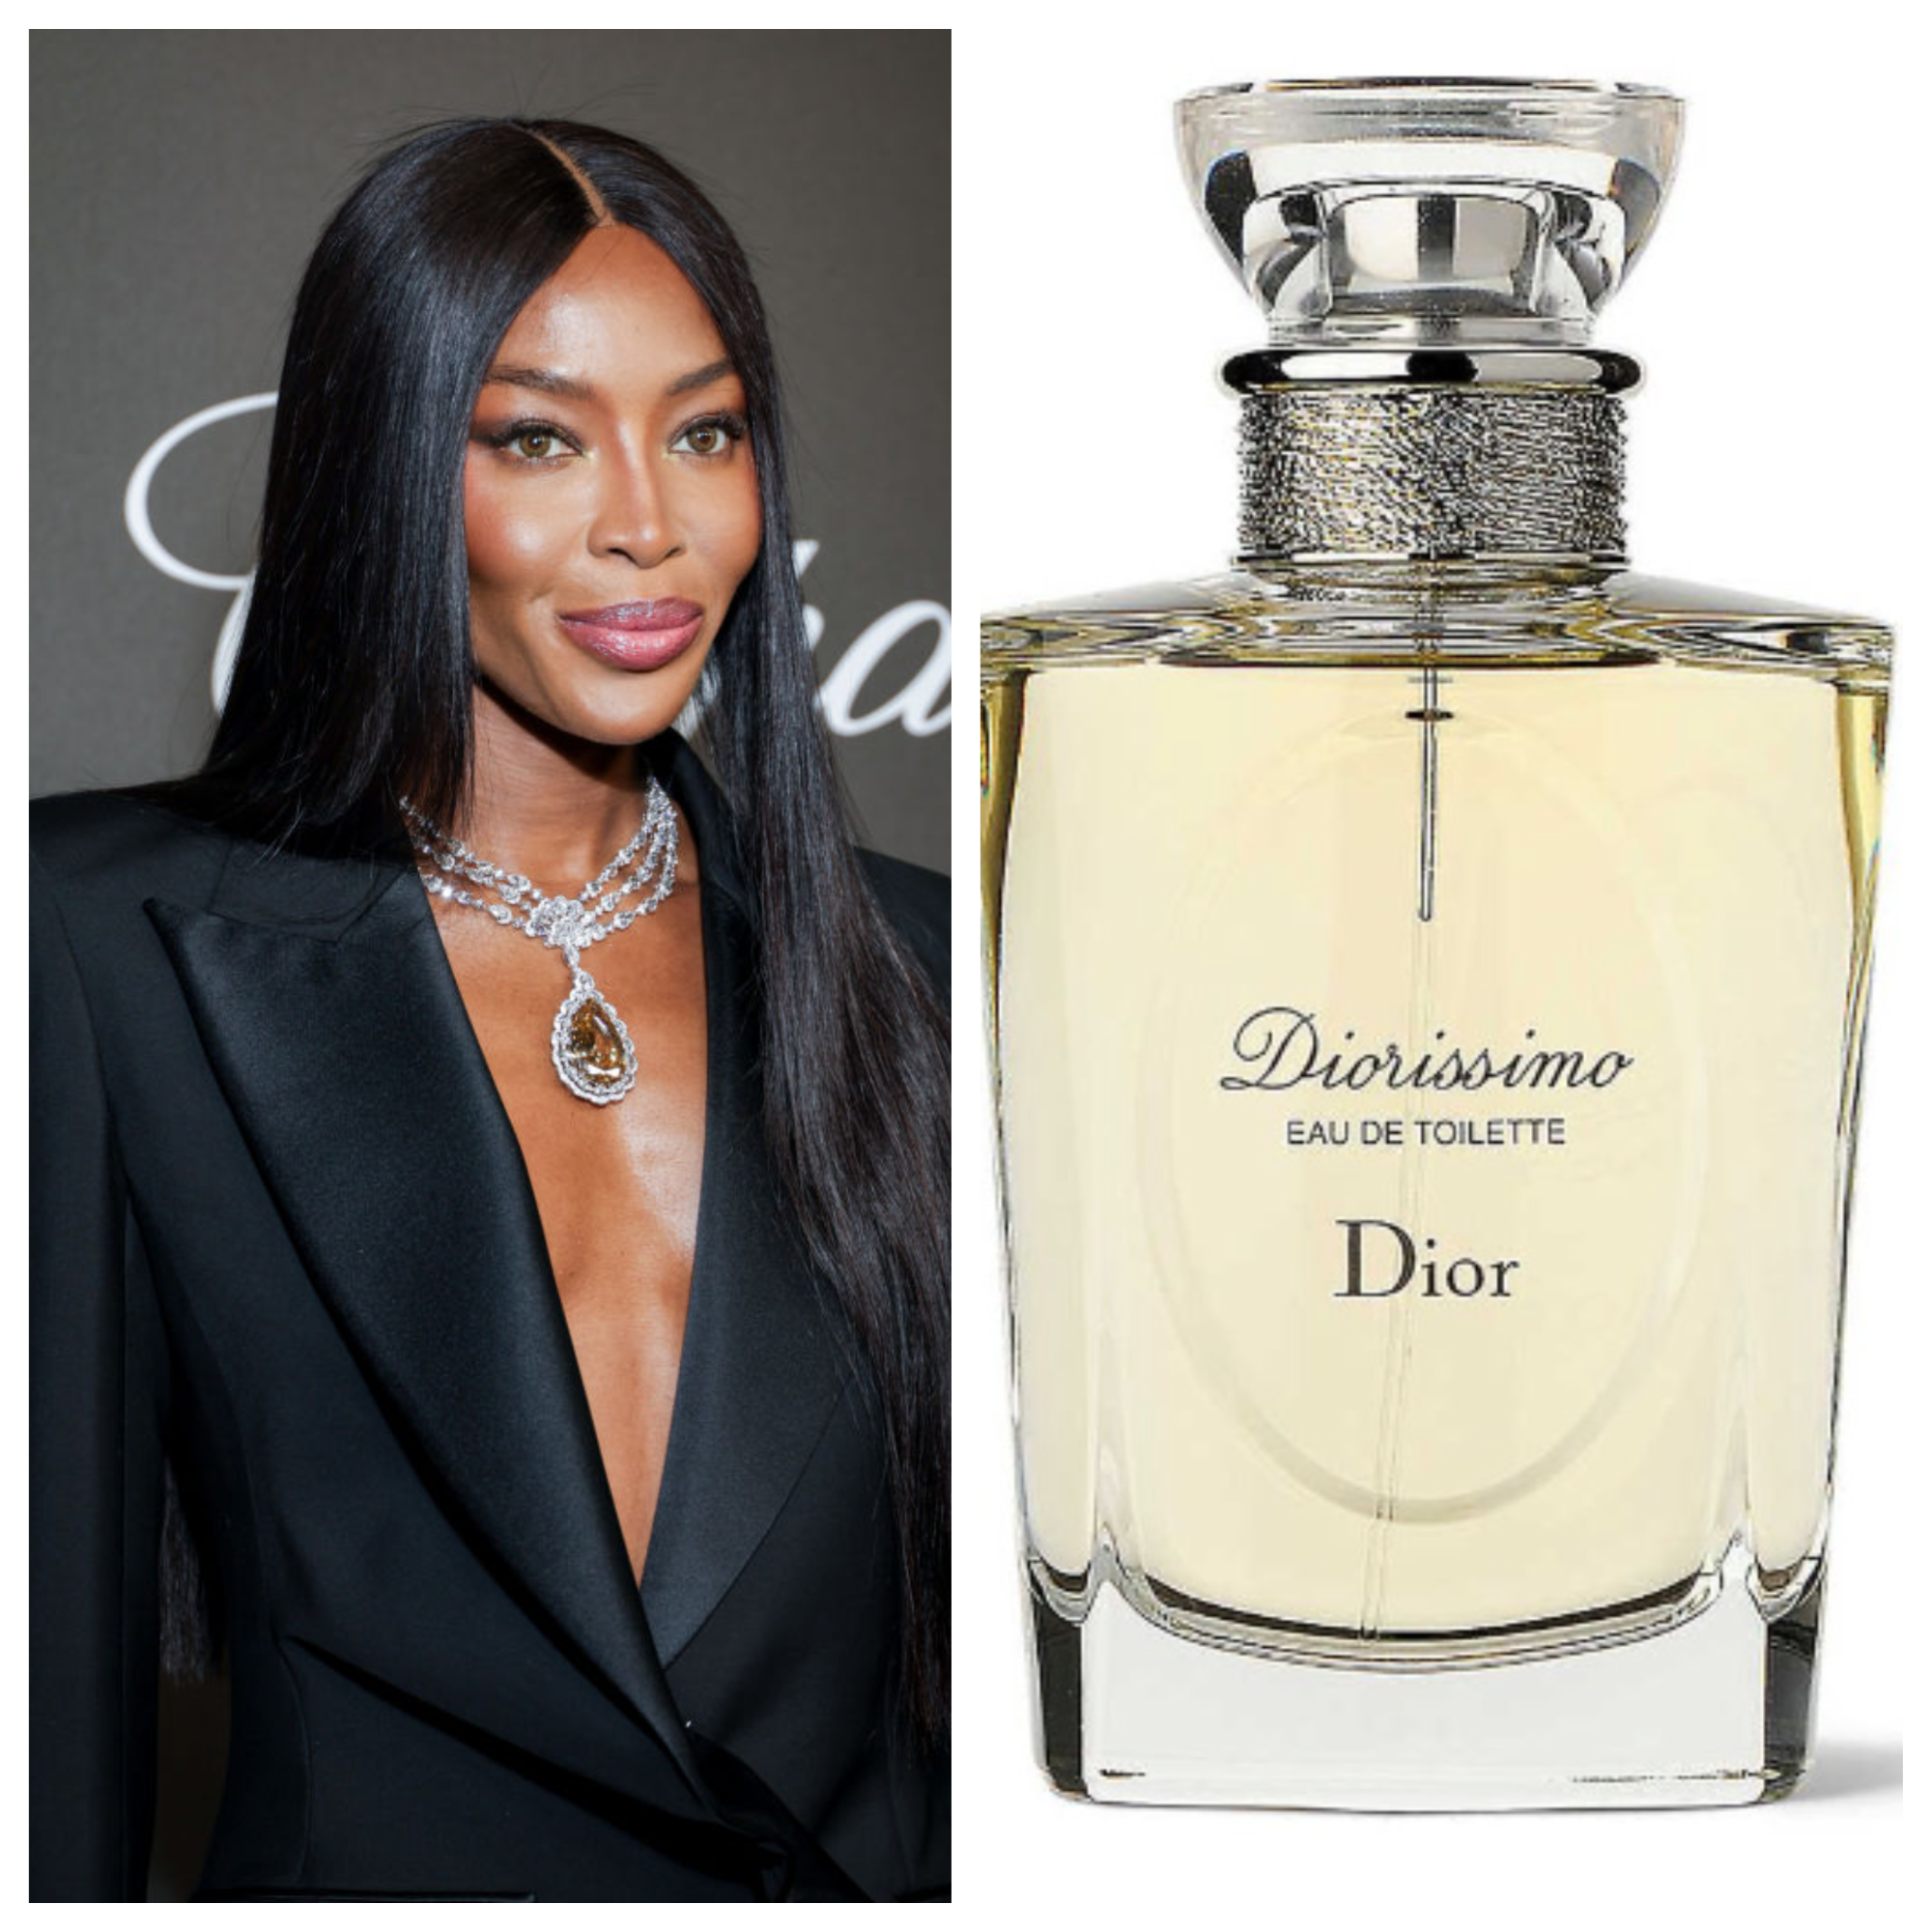 My guide to celebrity perfumes - collection + recommendations (Part I)